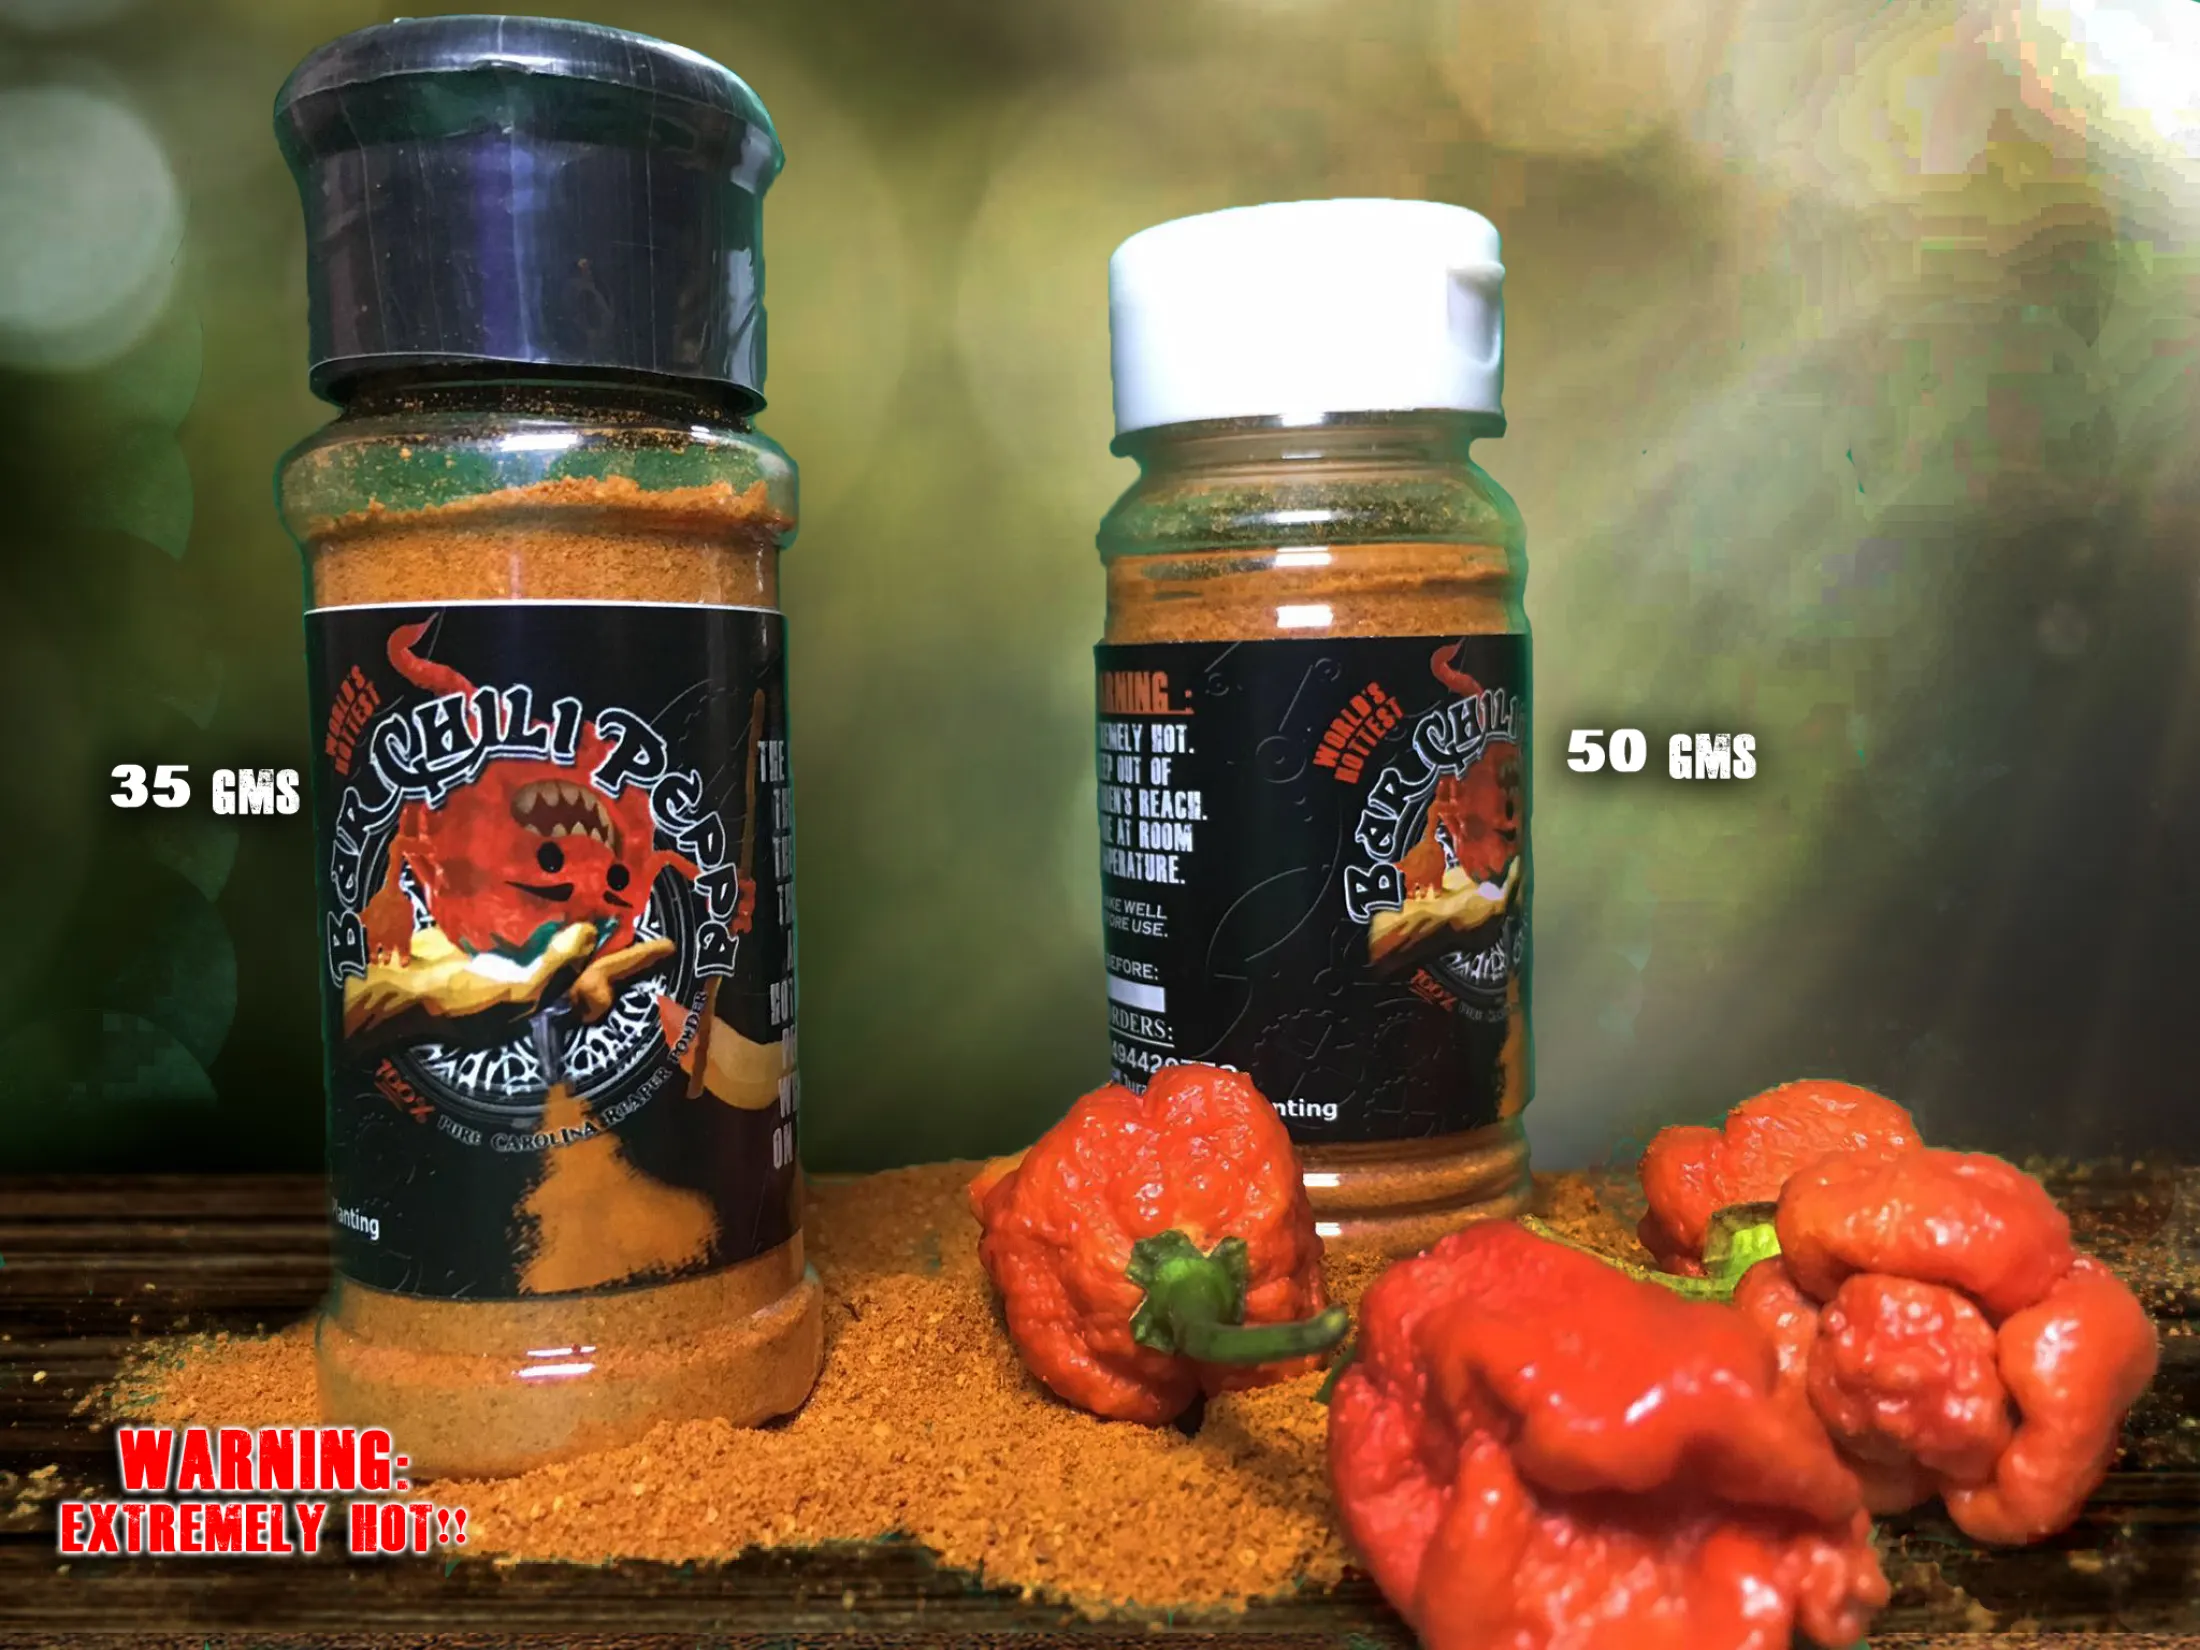 100 Carolina Reaper Powder 5g Buy Sell Online Pepper With Cheap Price Lazada Ph